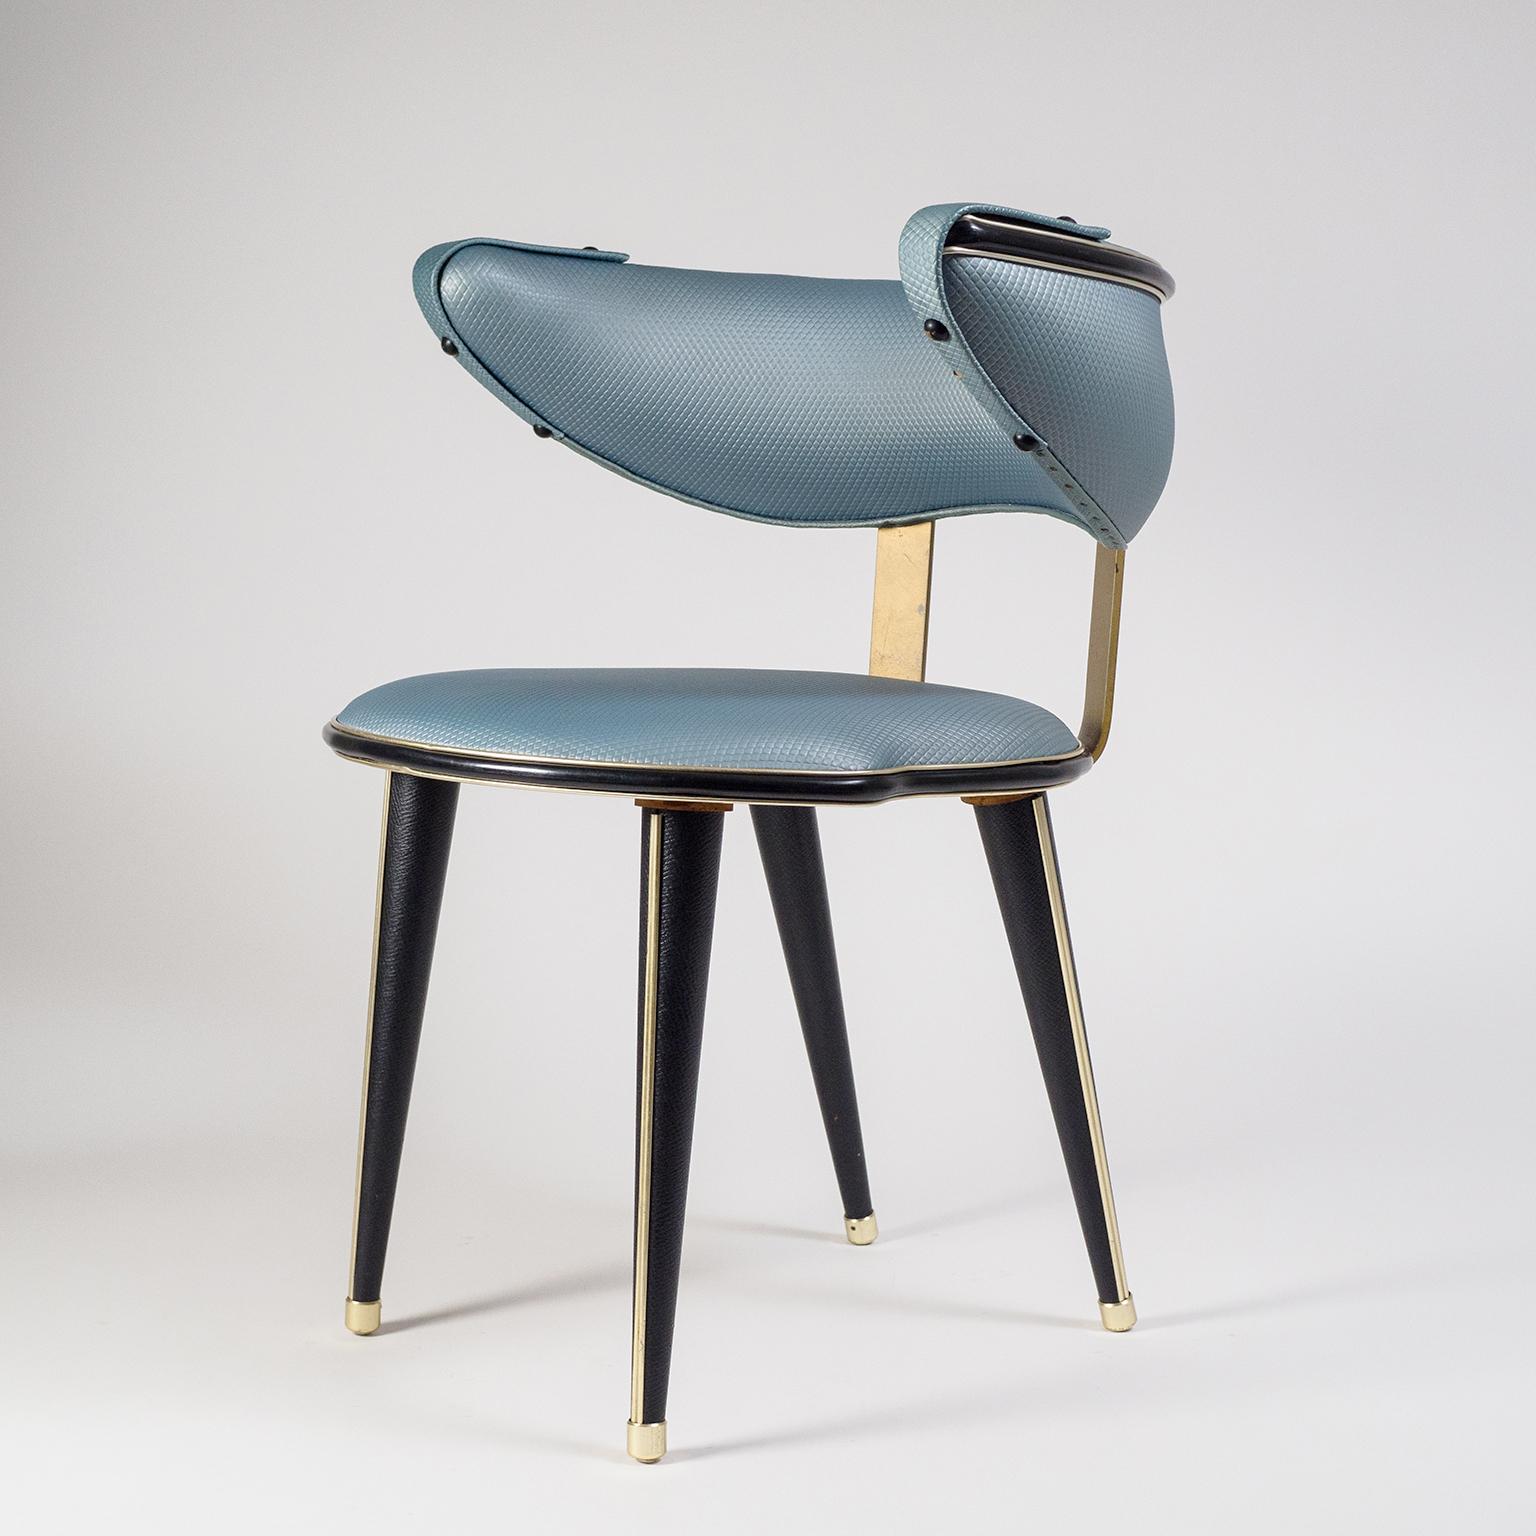 Lovely Italian side or vanity chair by Umberto Mascagni, circa 1960. The seat and armrest are upholstered in a rare metallic steely-blue colored leatherette with a geometric imprint, the wooden legs in black faux-leather. Additional details are in